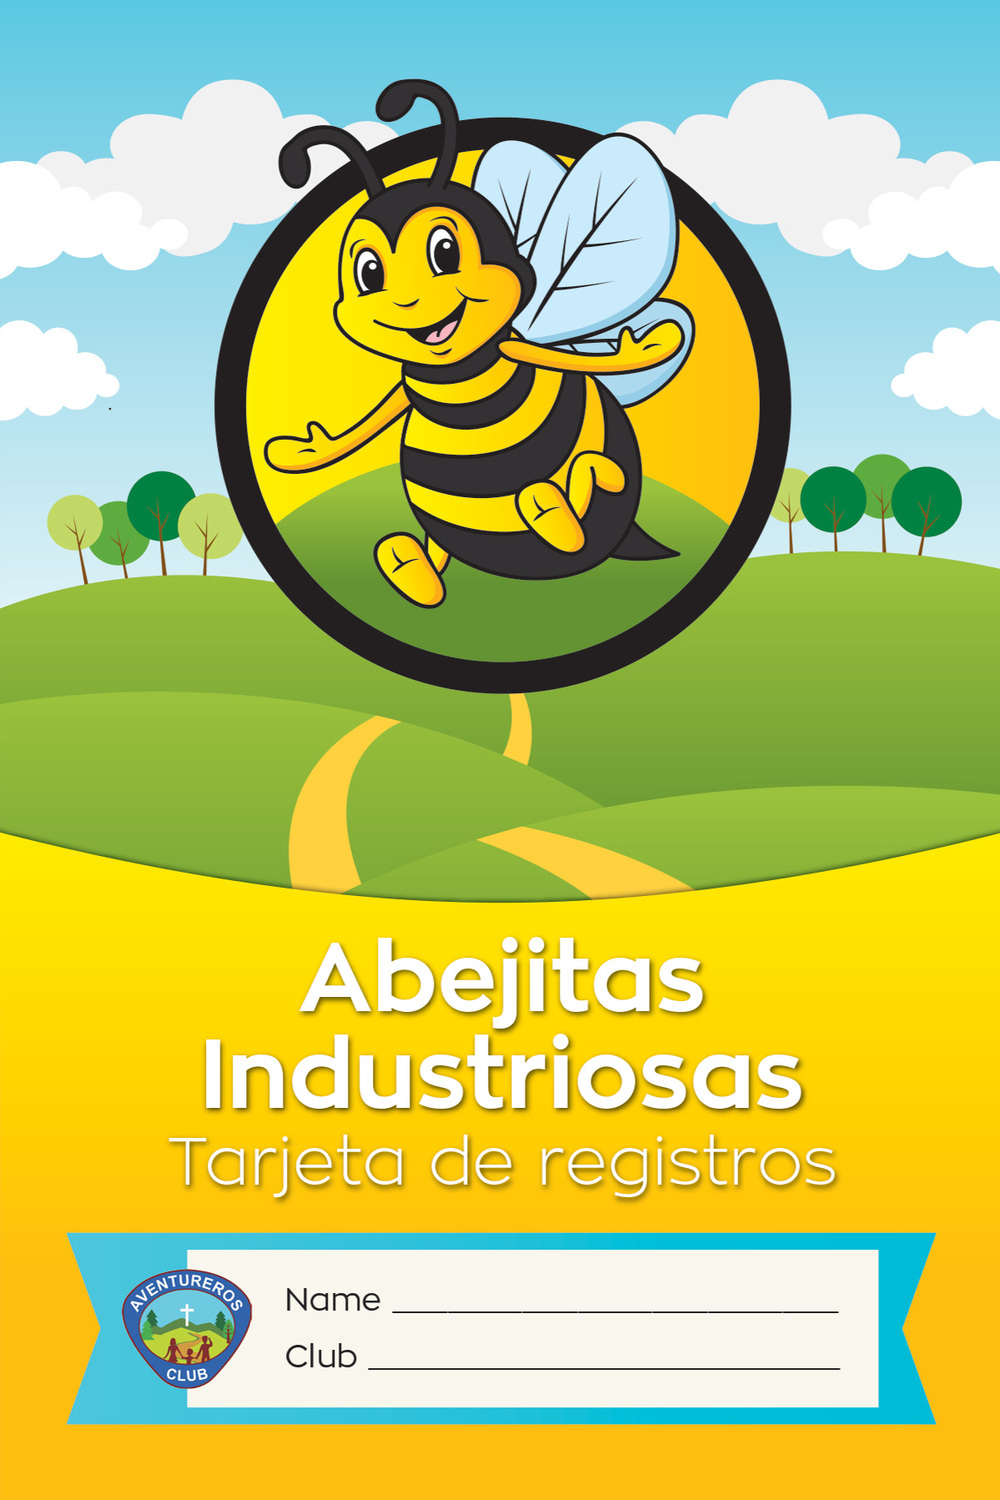 Adventurer Record Card, Busy Bee (Spanish)